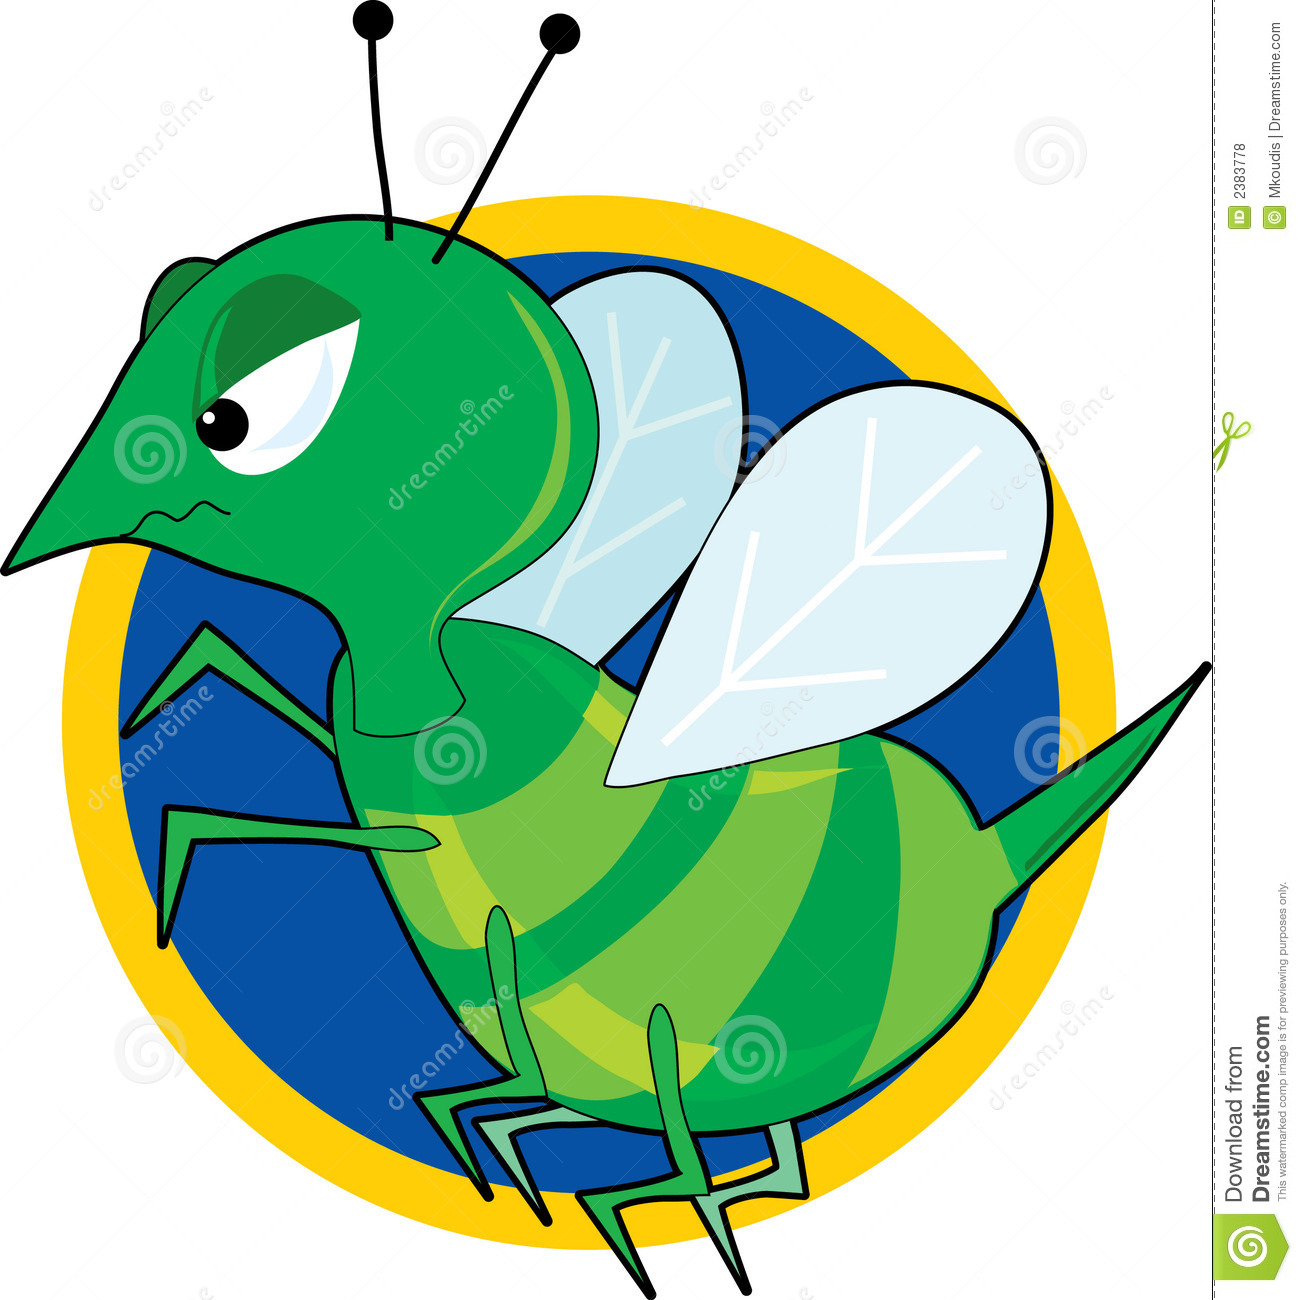 Angry Hornet Royalty Free Stock Photos   Image  2383778